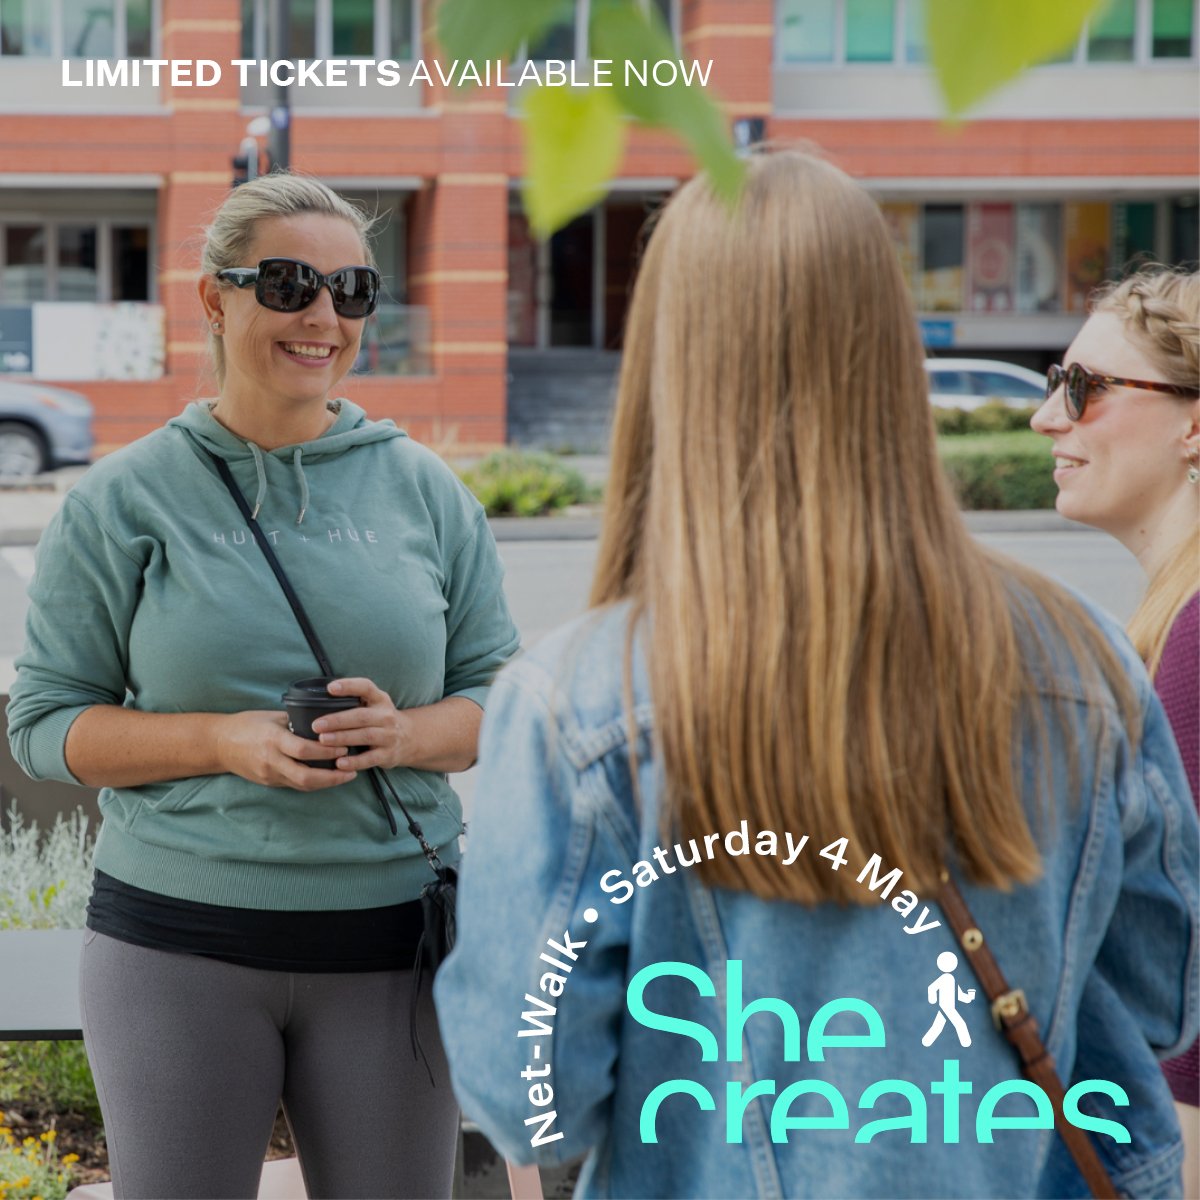 Our next event is only days away, so snap up your tickets quick!

Our NetWalk series is designed to connect like-minded creatives in an environment that isn't so daunting. Enjoy some fresh air, great conversation and a delicious coffee all while gett